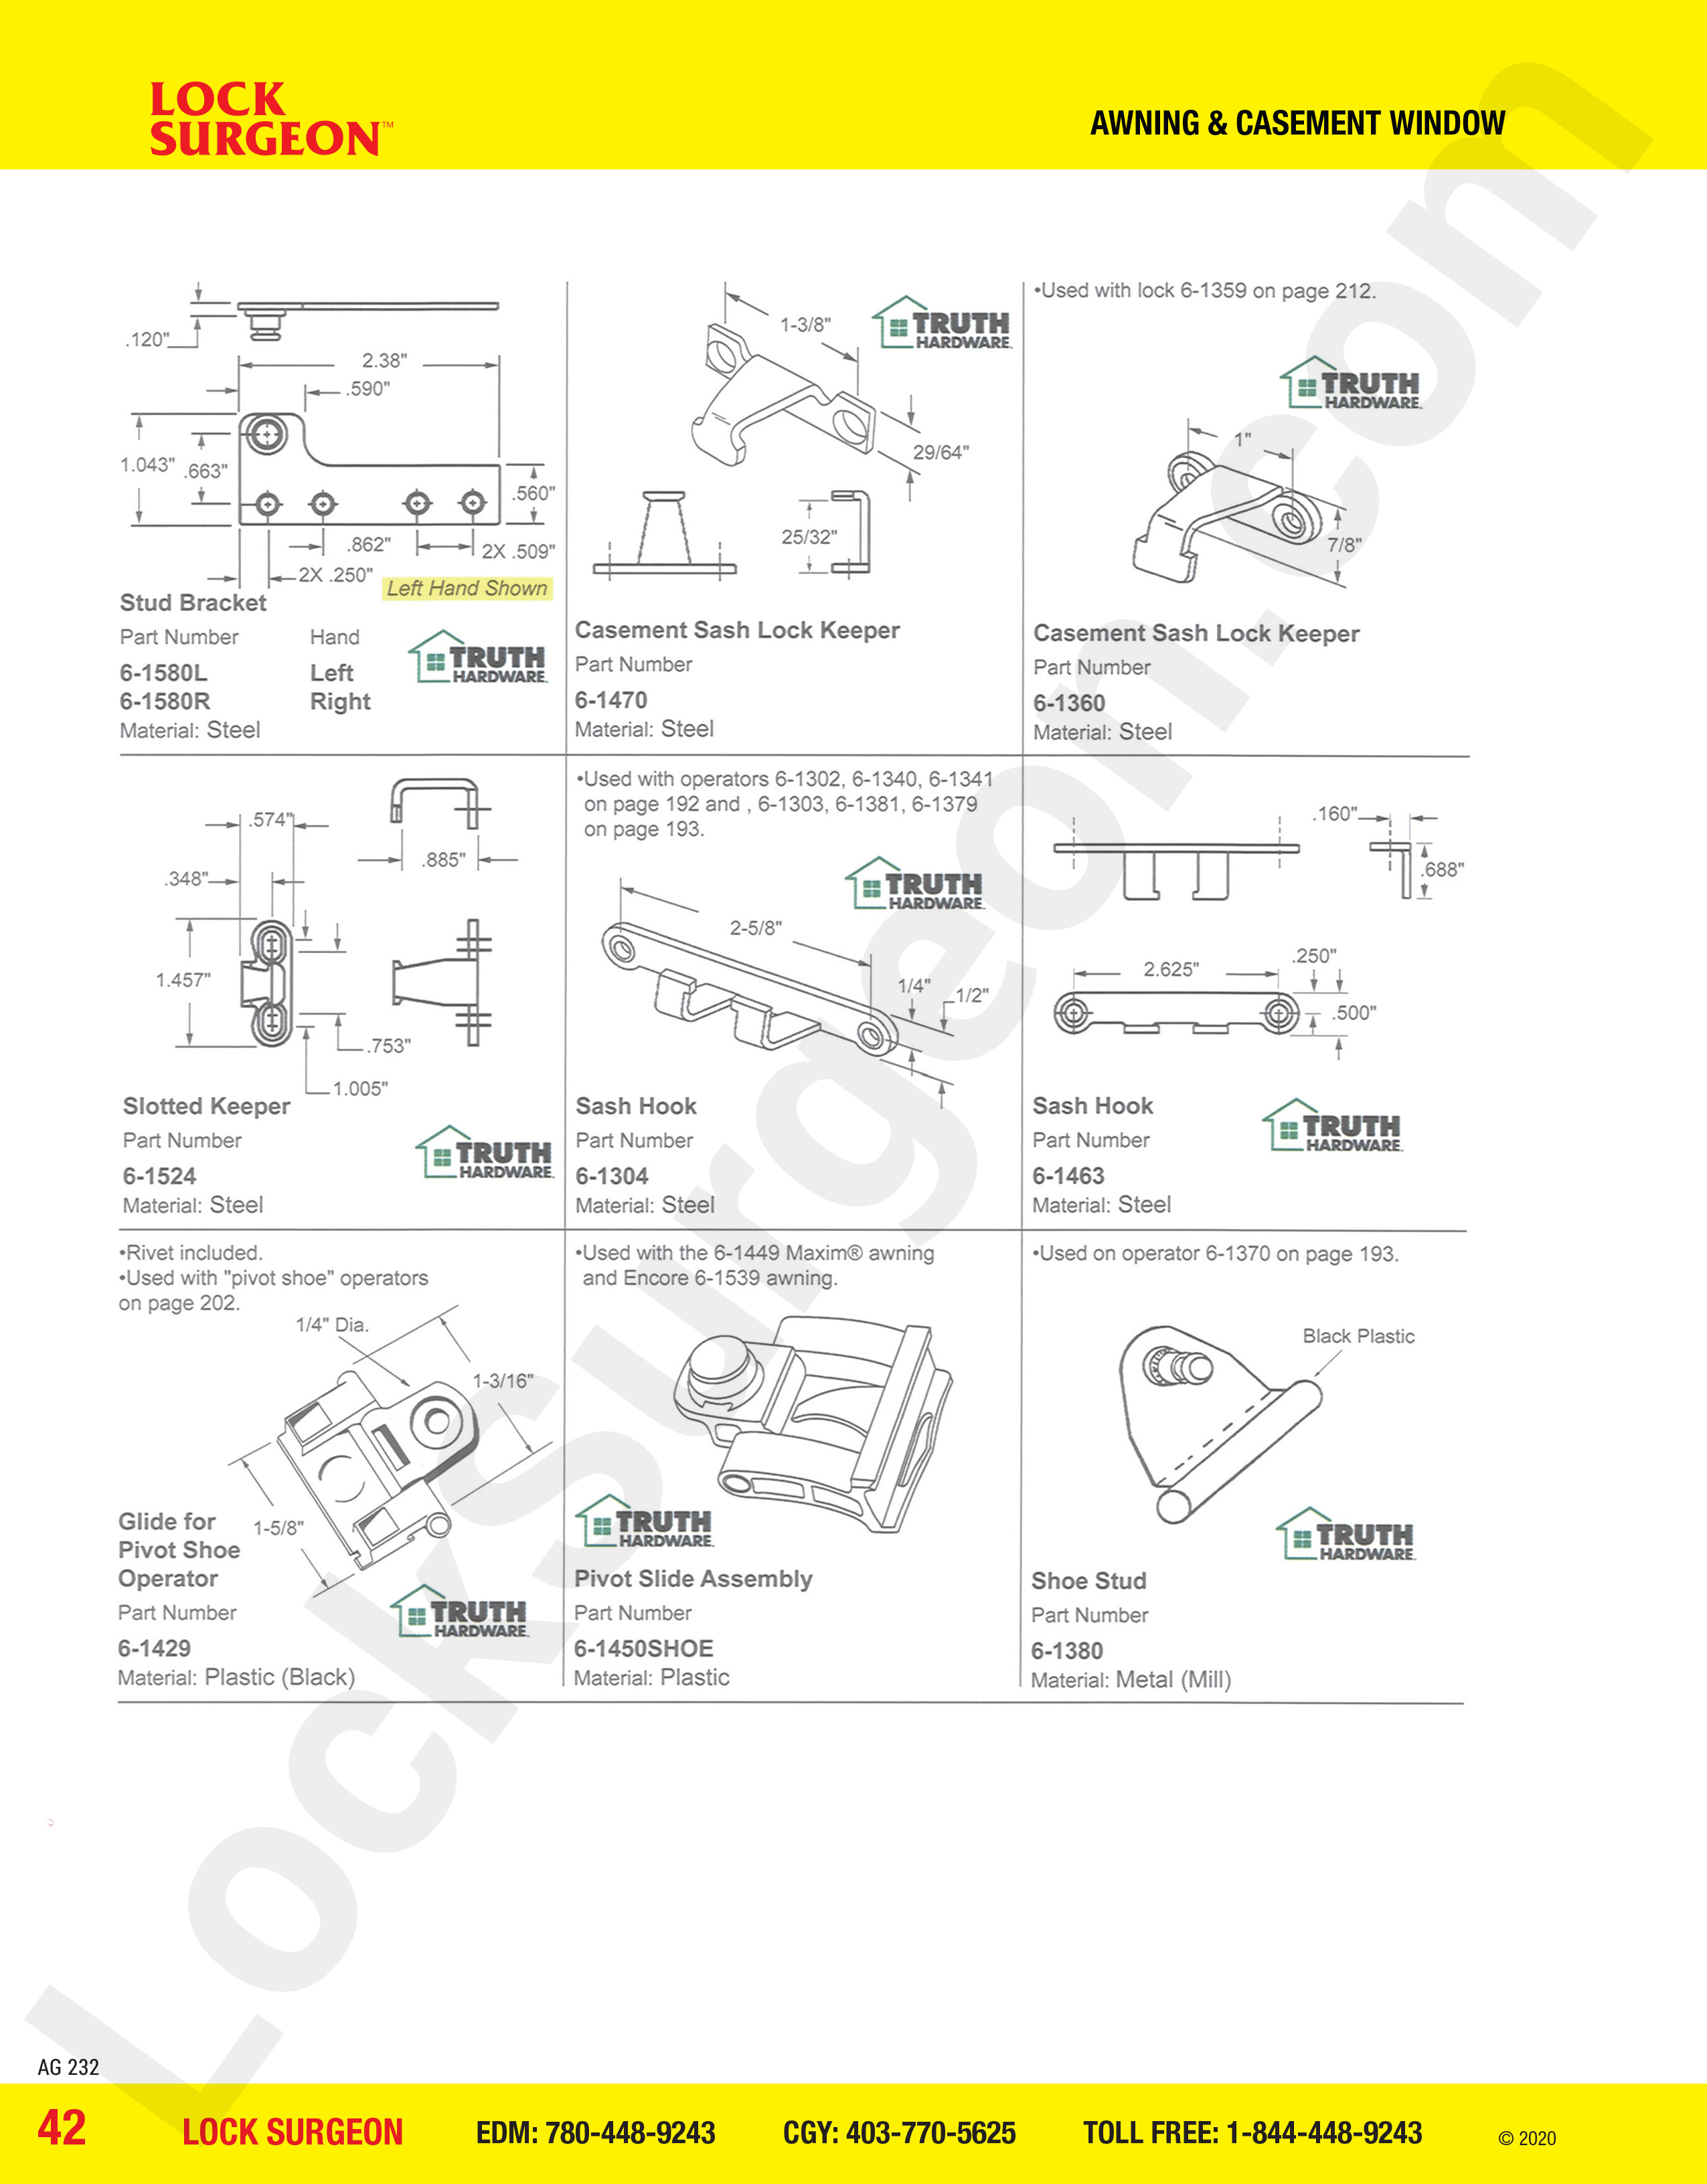 awning and casement window parts for truth hardware keepers Acheson mobile